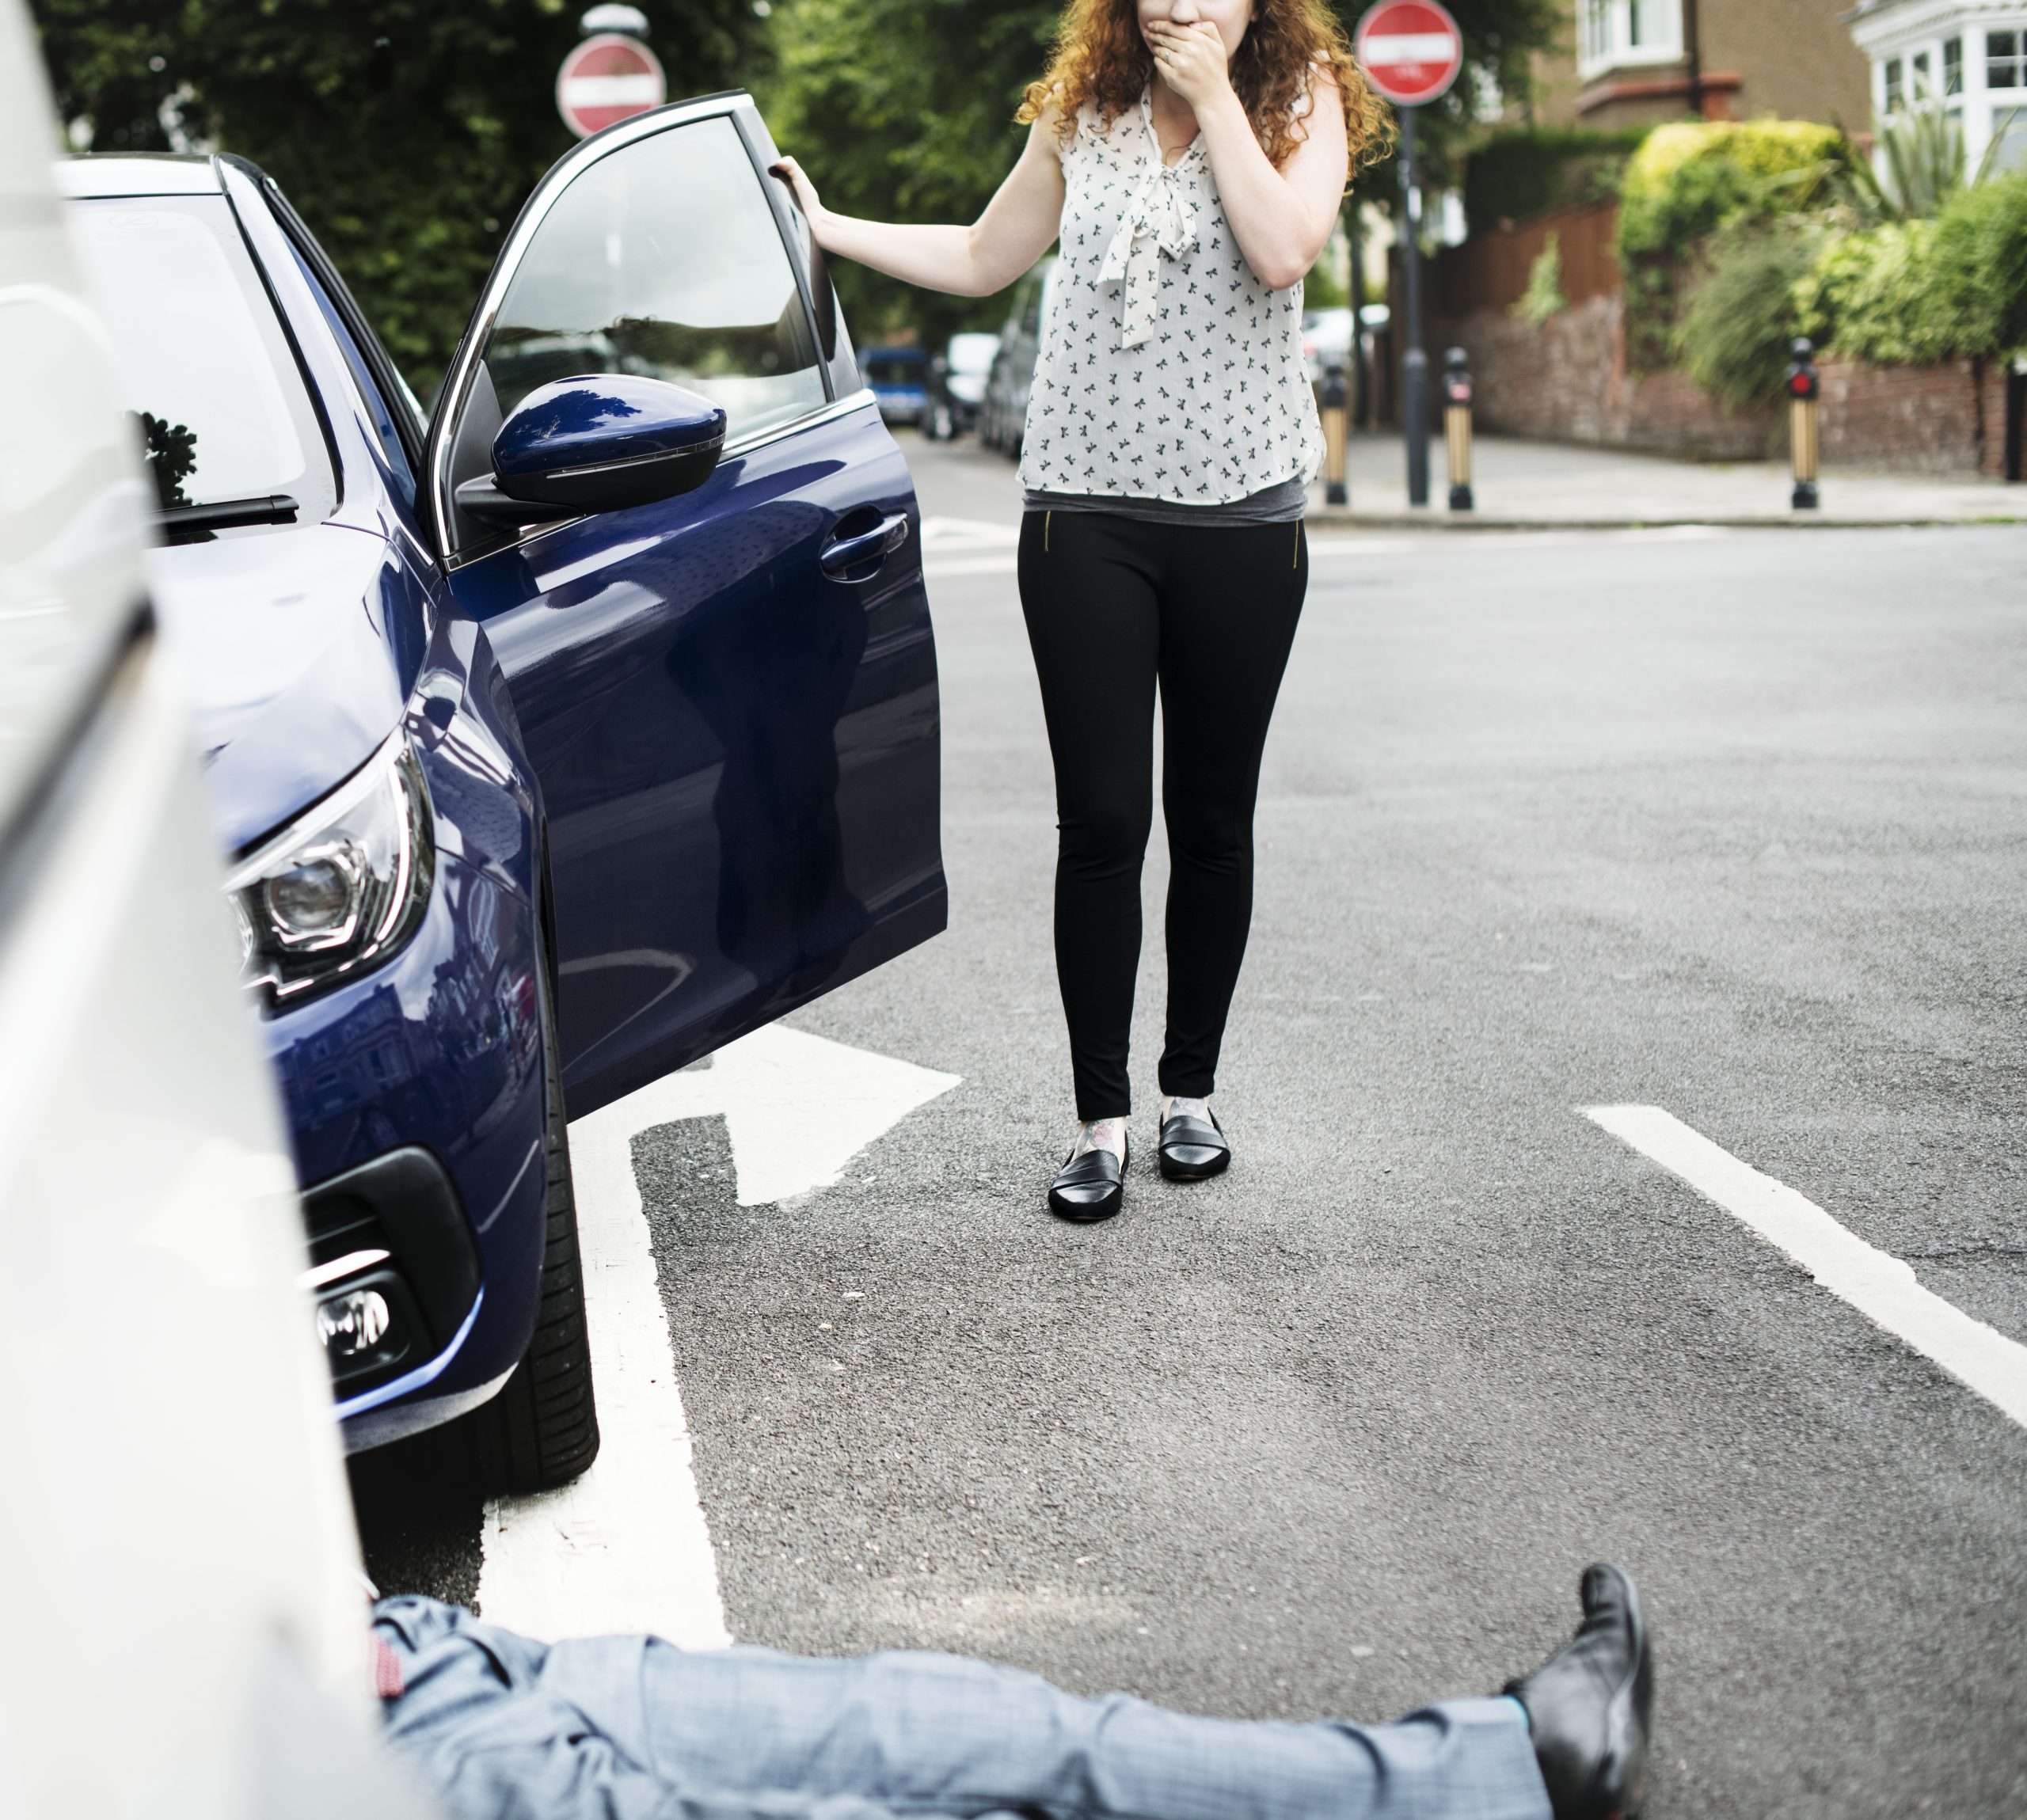 Pedestrian Accident - Person lying on the ground after a car accident